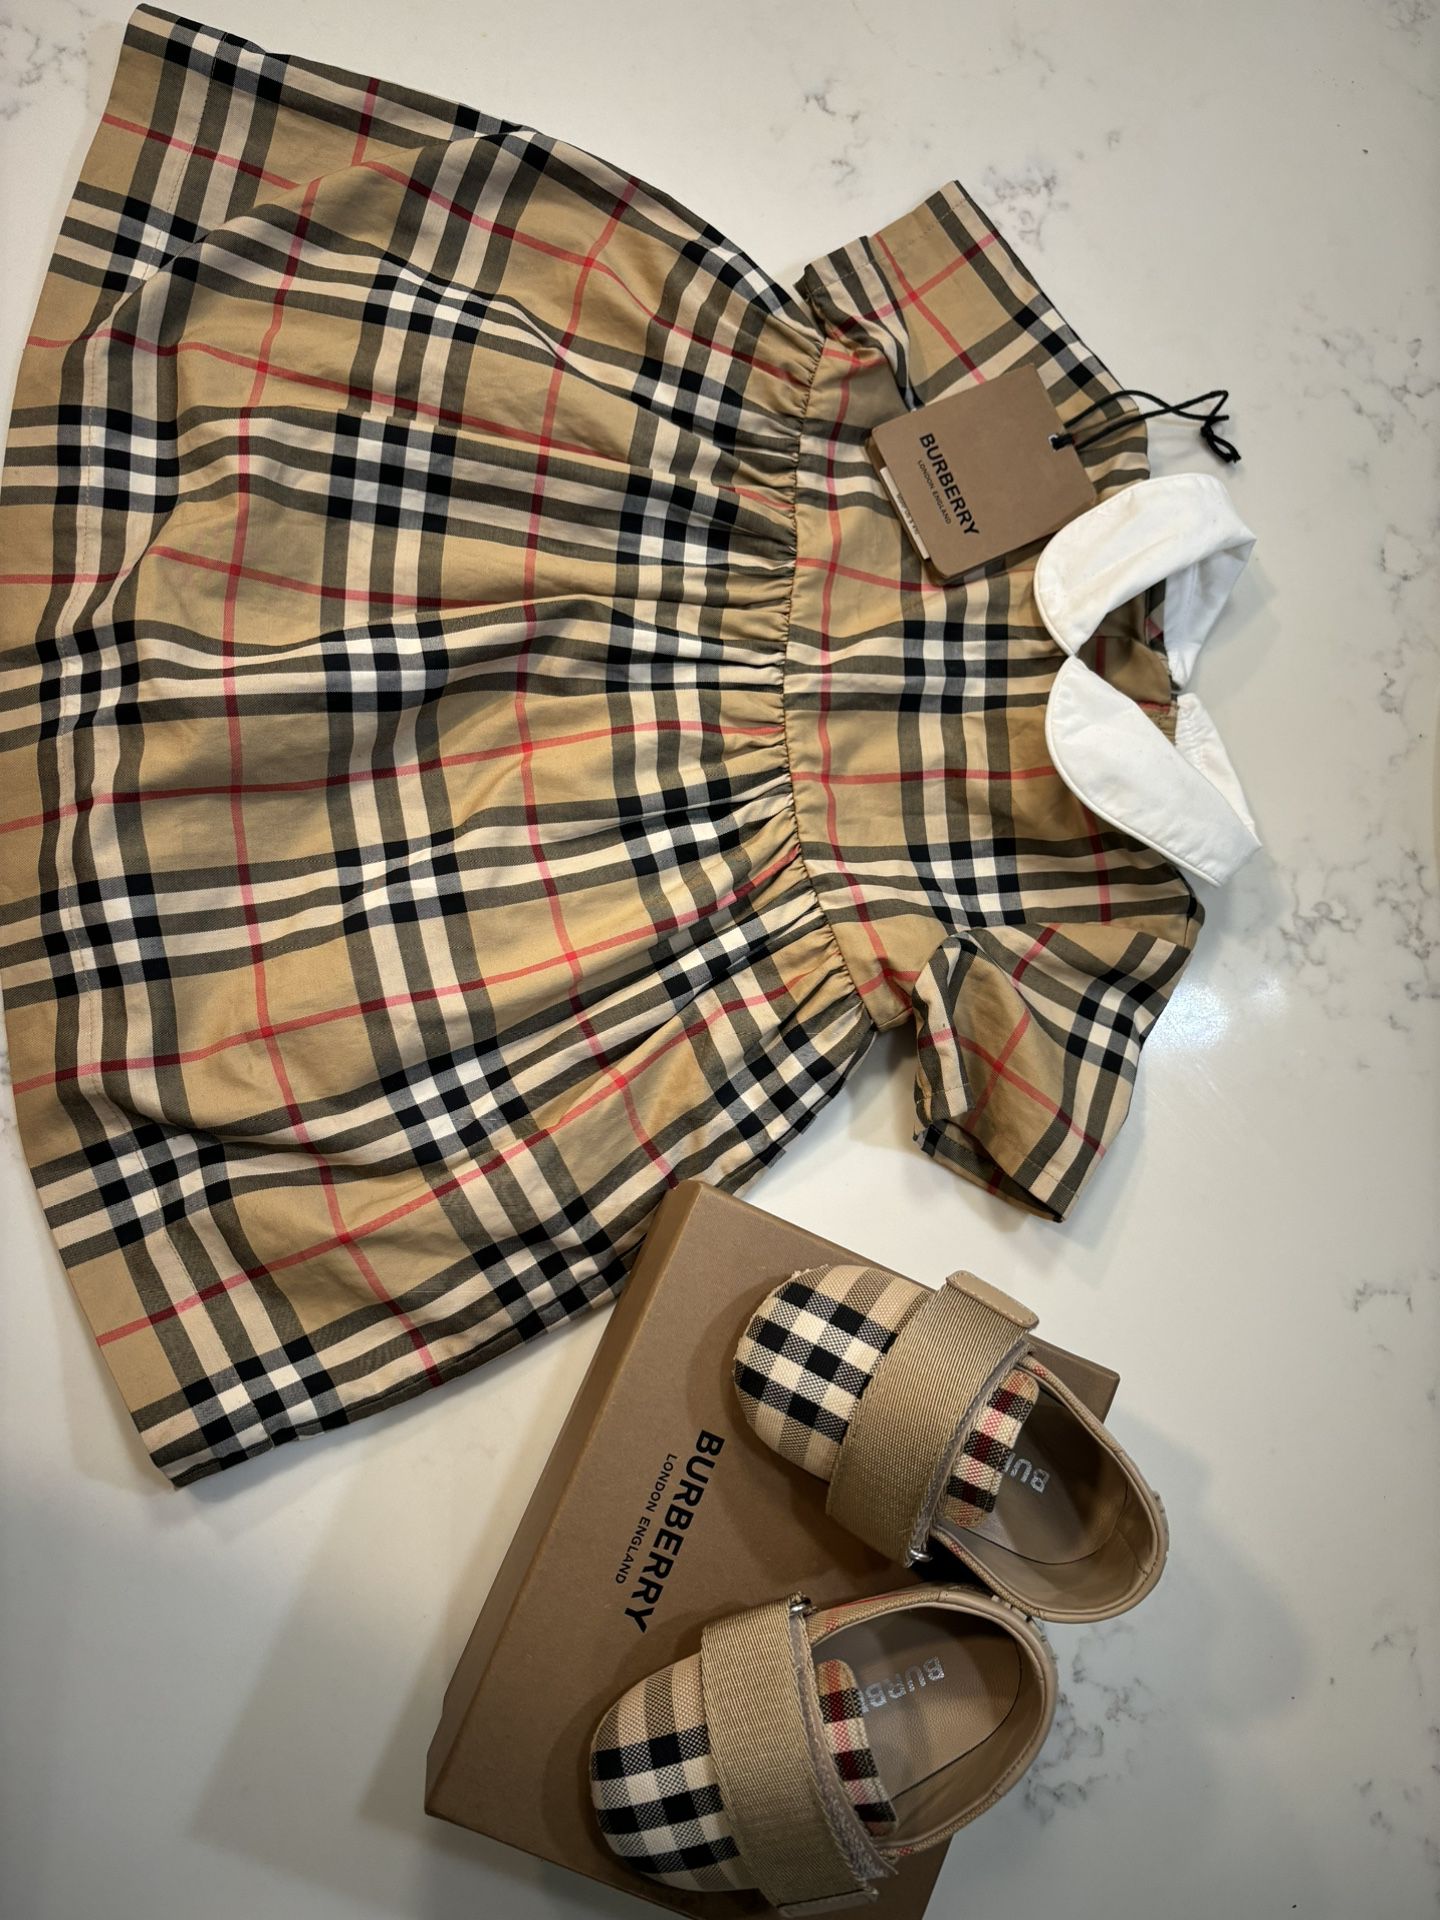 Infant Burberry Outfit 